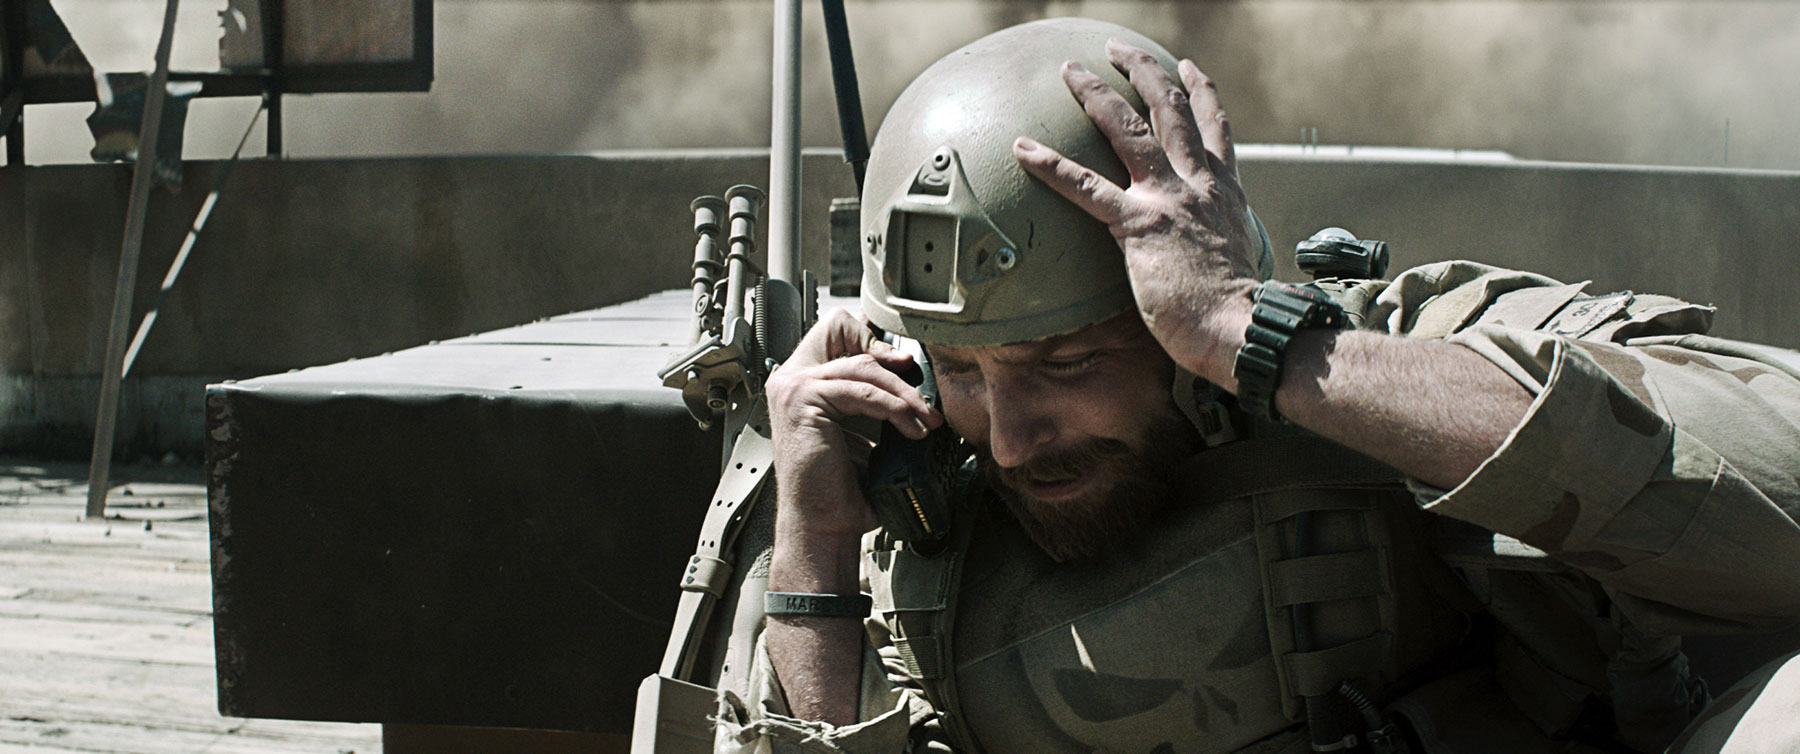 Bradley Cooper as Chris Kylethe movie "American Sniper." He wears dark green military gear and helmoet, his left hand on his head while holding a walkie-talkie in his left hand.